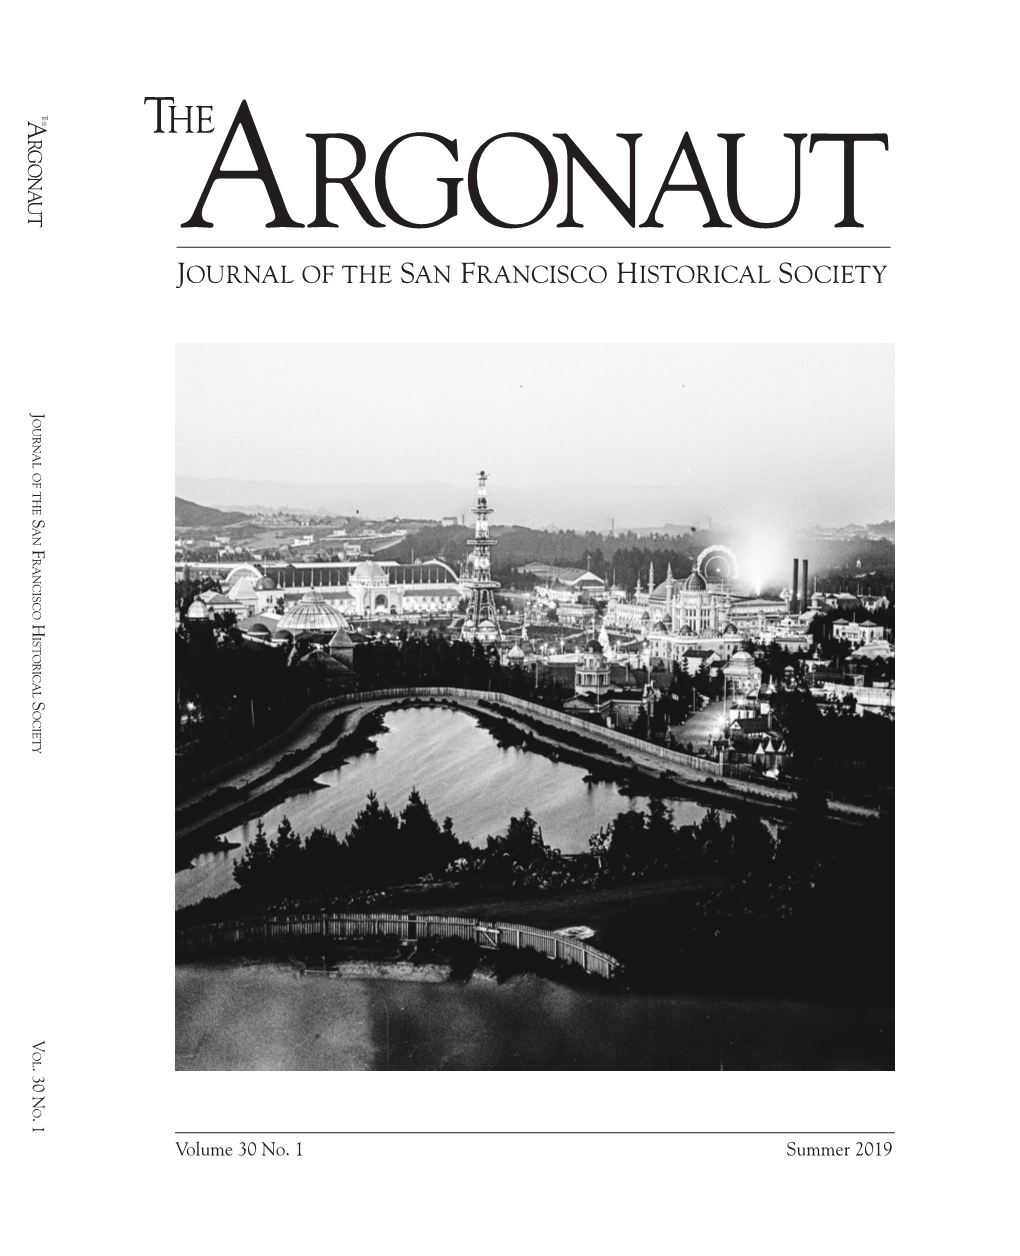 Argonaut #1 2019 Cover.Indd 1 7/31/19 10:49 AM the Argonaut Journal of the San Francisco Historical Society Publisher and Editor-In-Chief Charles A